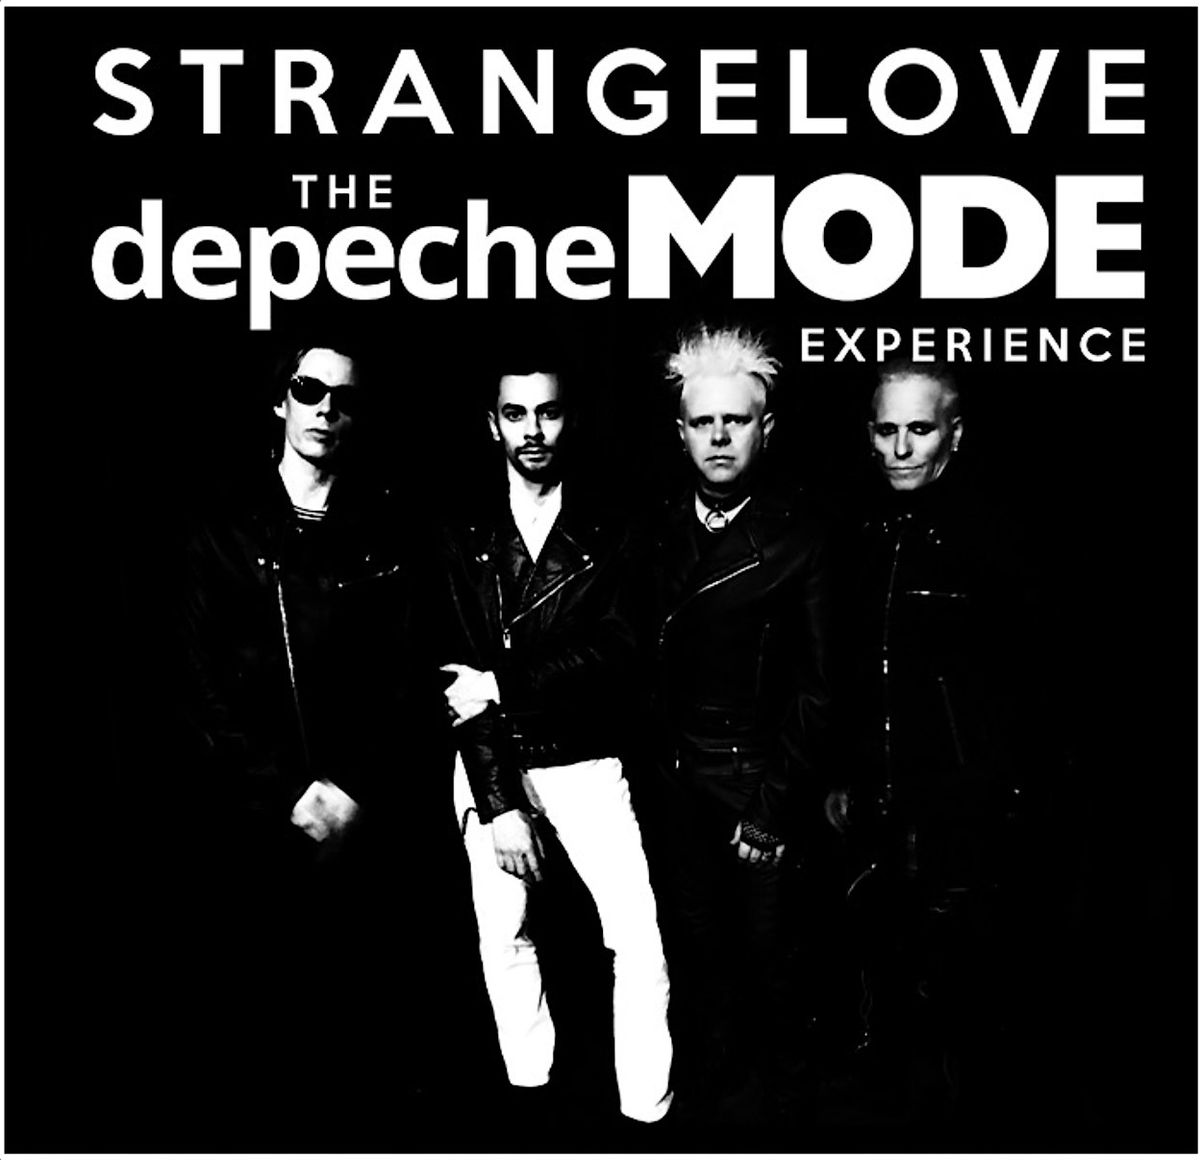 Strange Love - The Depeche Mode Experience at The Piazza